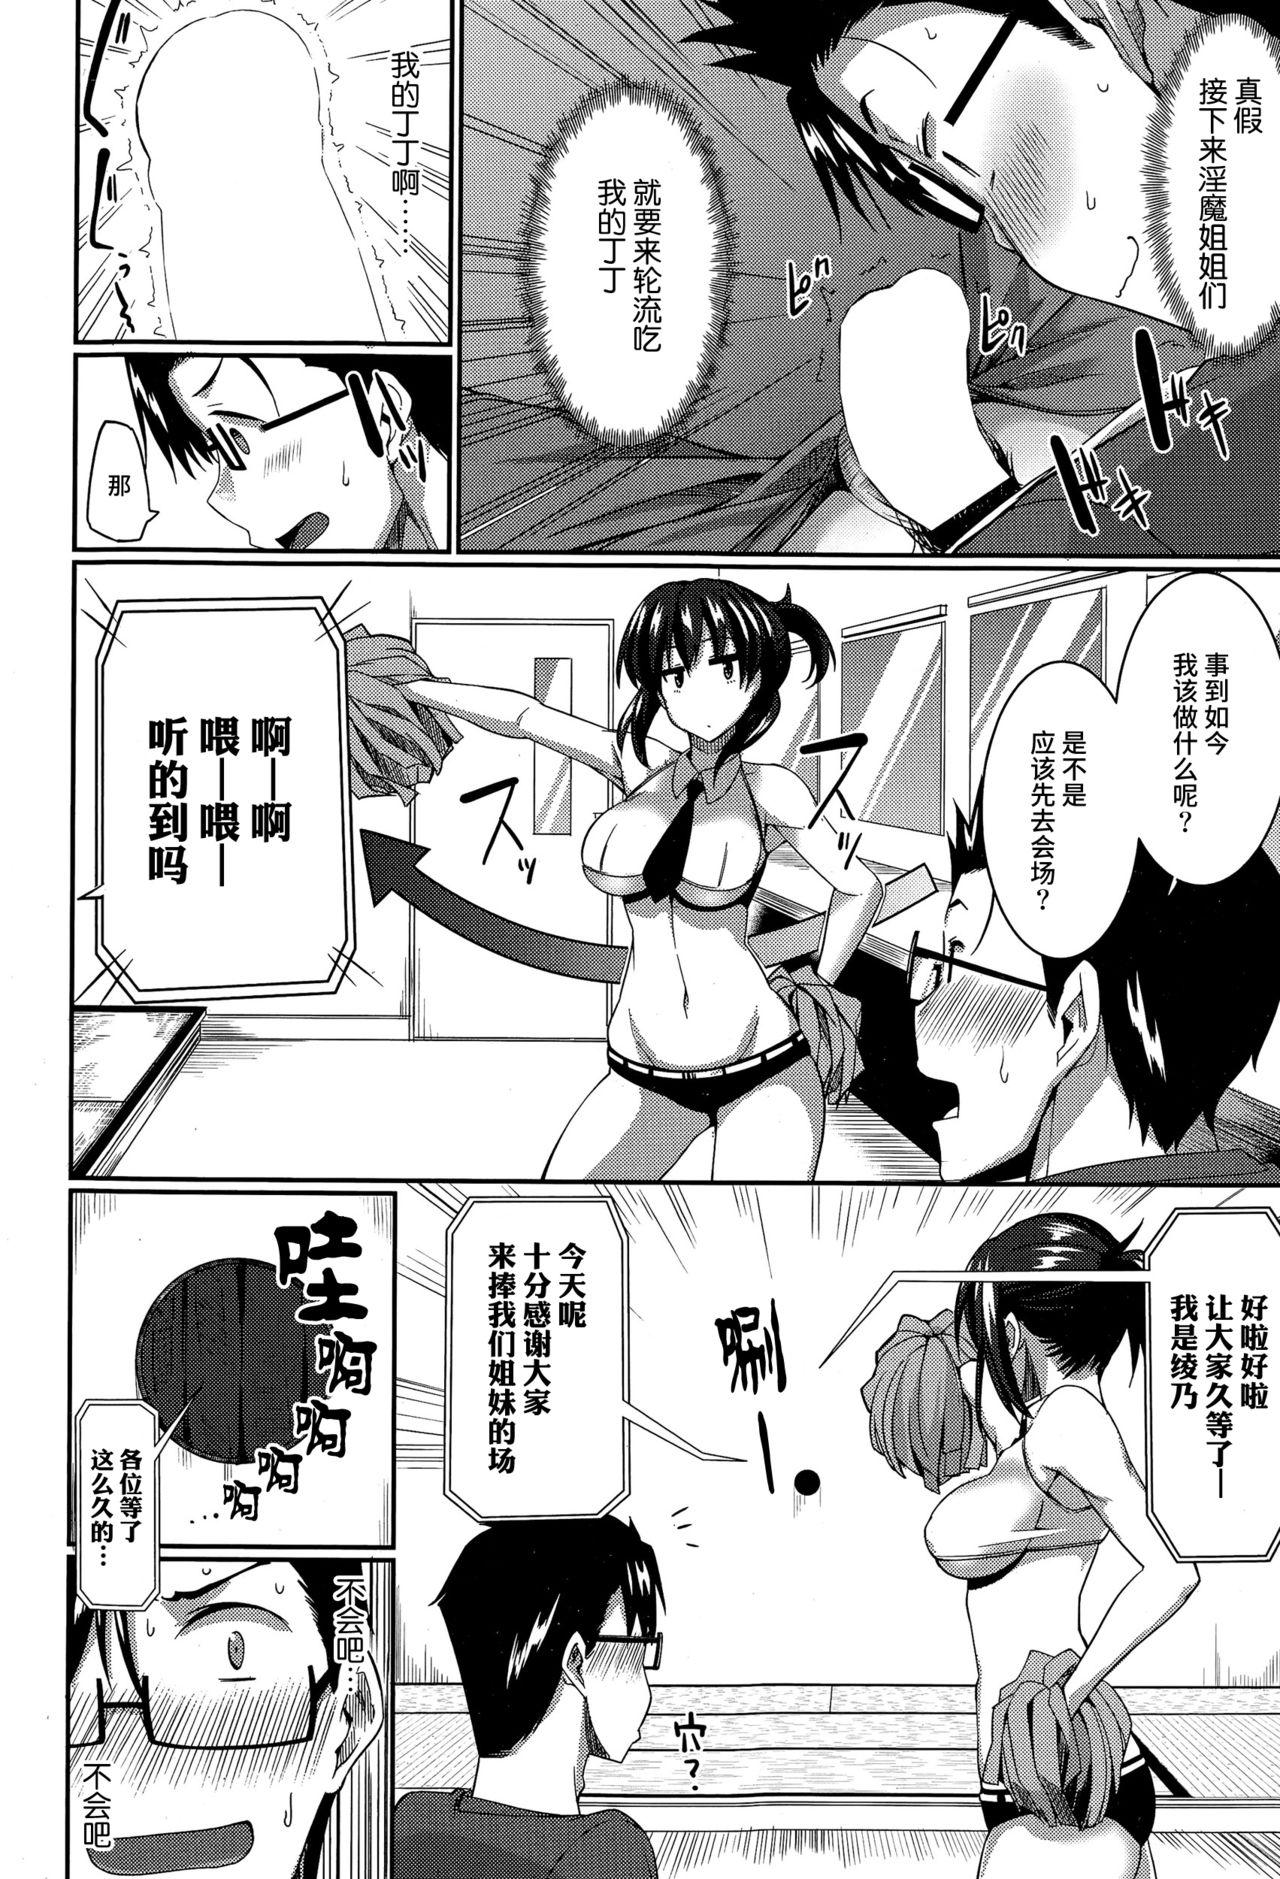 Ejaculation Inma no Mikata! Stretching - Page 8